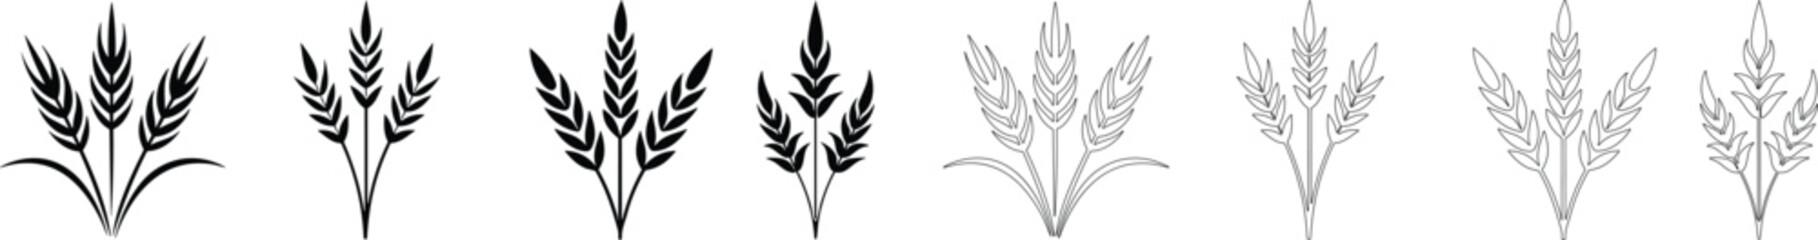 Bunches of wheat or rye ears with whole grain. Wheat wreaths and grain spikes set icons. Vector illustration